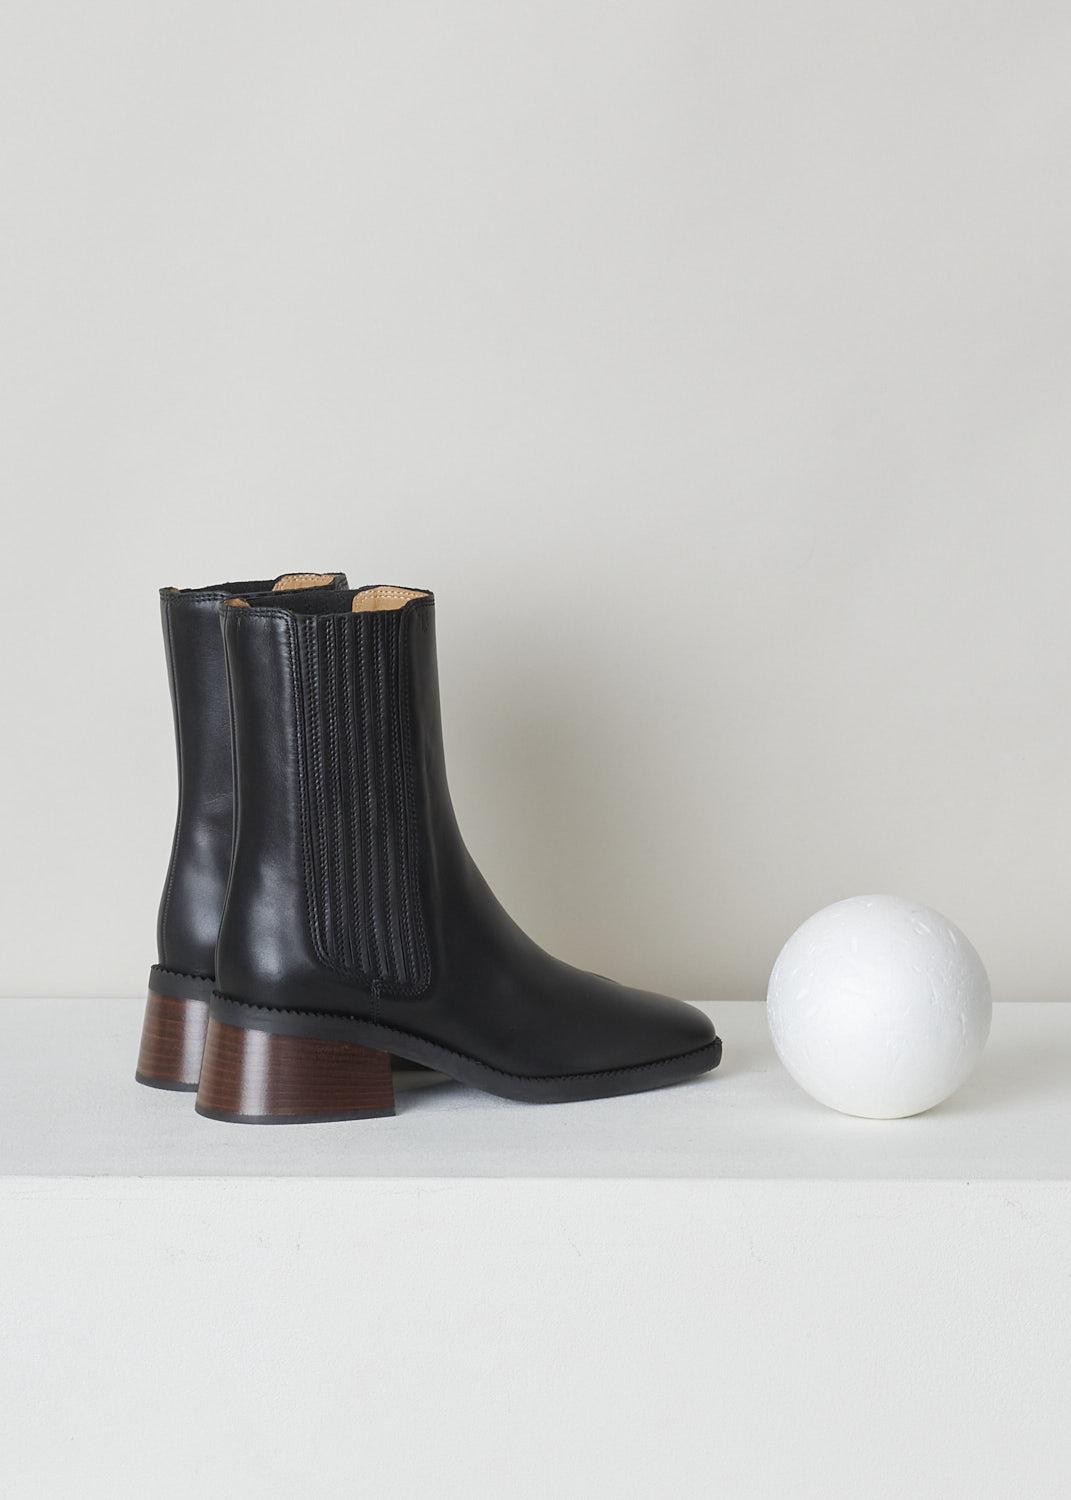 TODS, BLACK BOOTS WITH GUSSETED SIDES, XXW48K0FX80TFSB999_T55_TRONCH_ELAST, Black, Back, These black leather slip-on boots feature elasticated gusseted sides with a ribbed pattern, a squared toe and a block heel in brown. 

